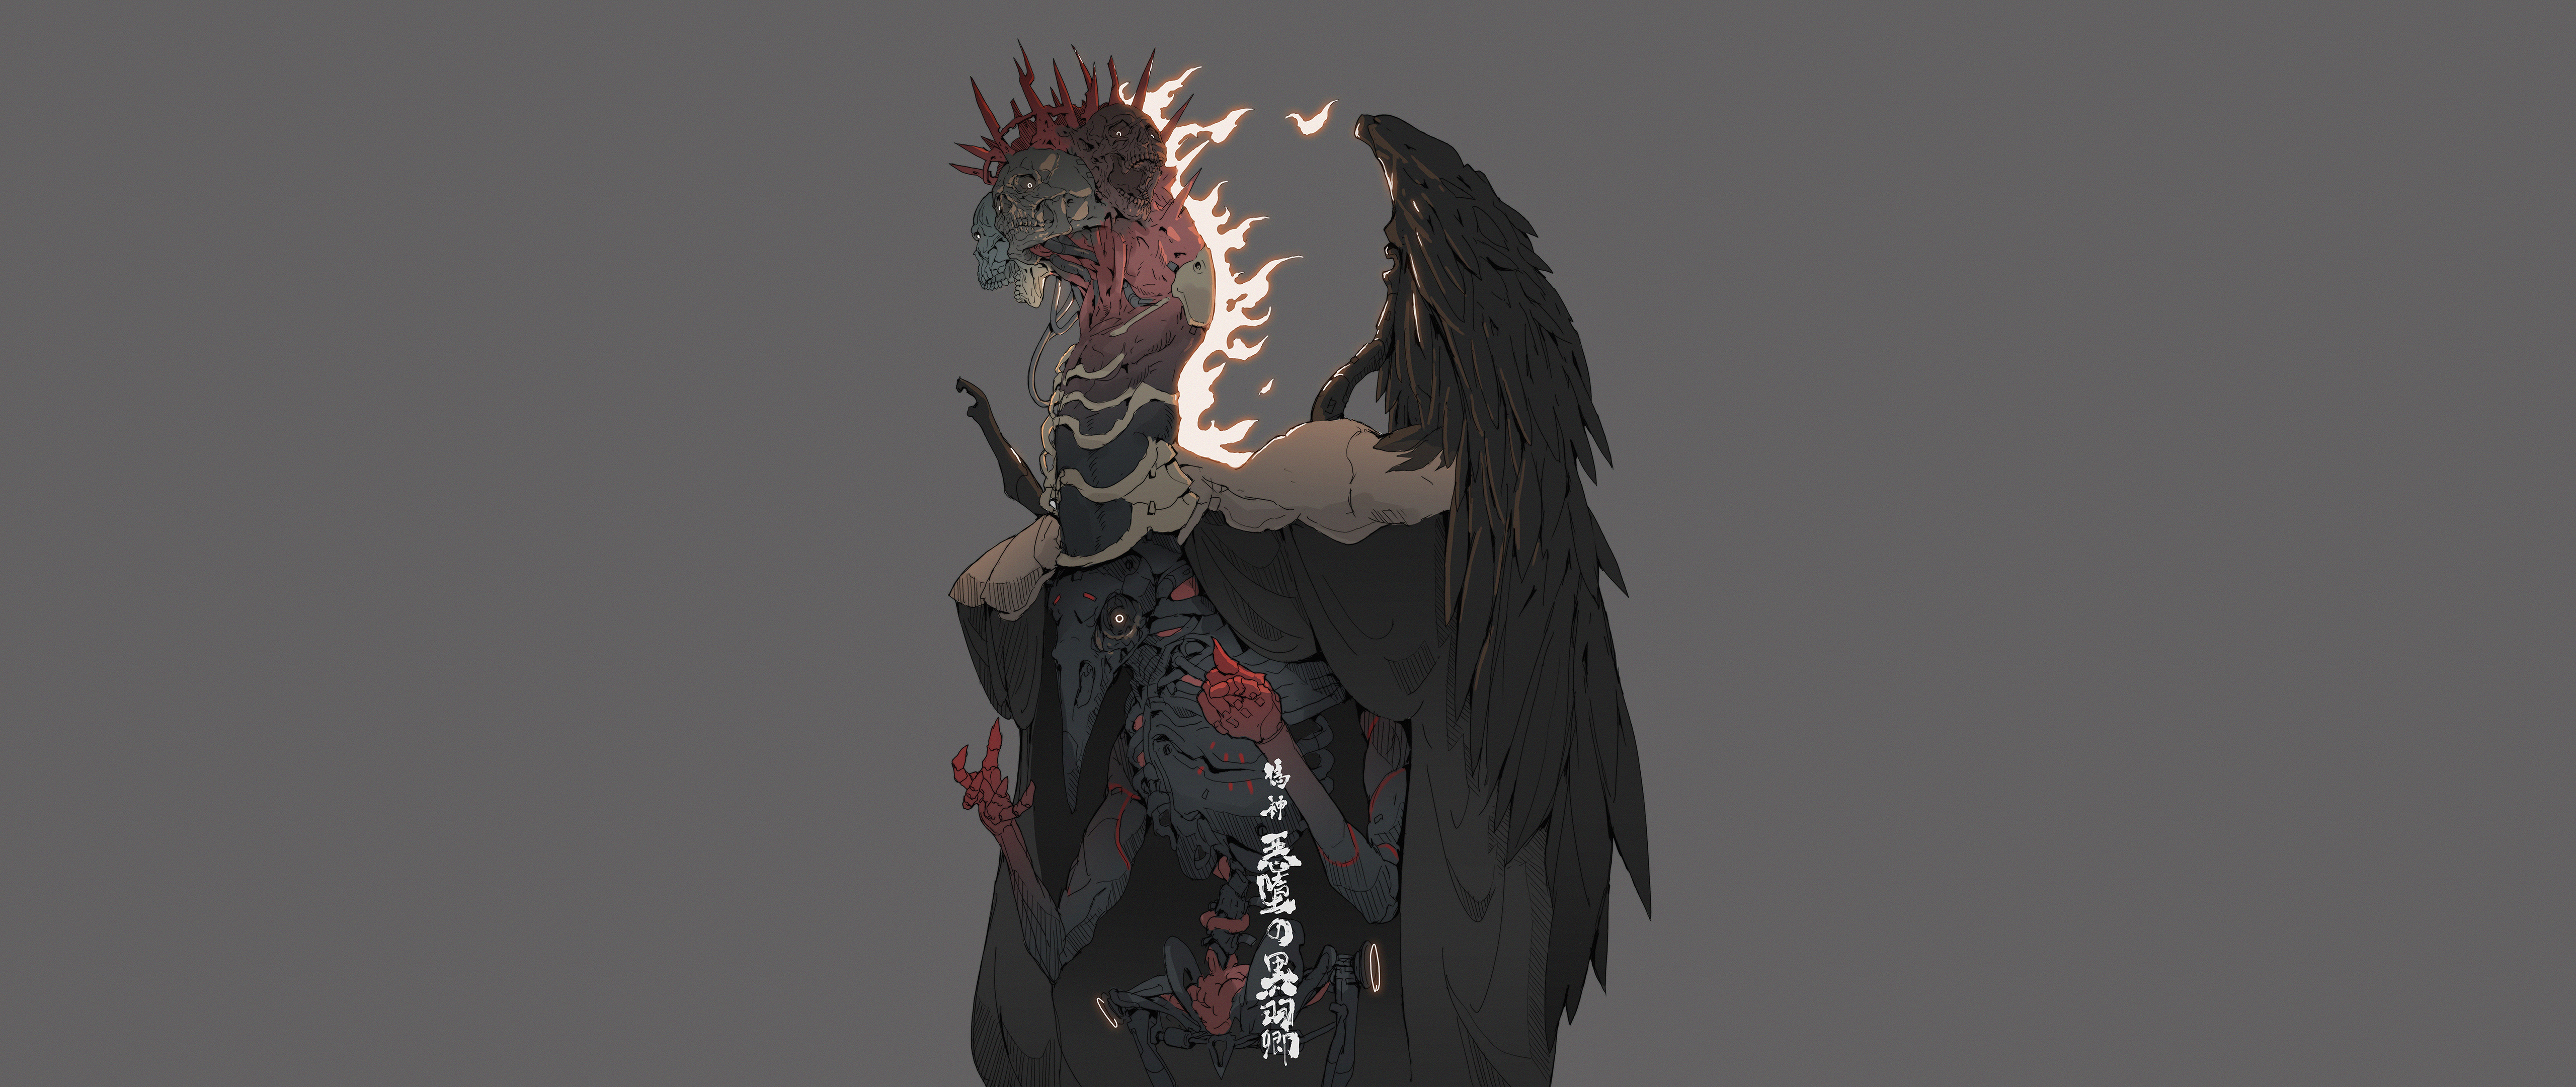 Skull Undead Robotic Ching Yeh Horror Chinese Character 5120x2160